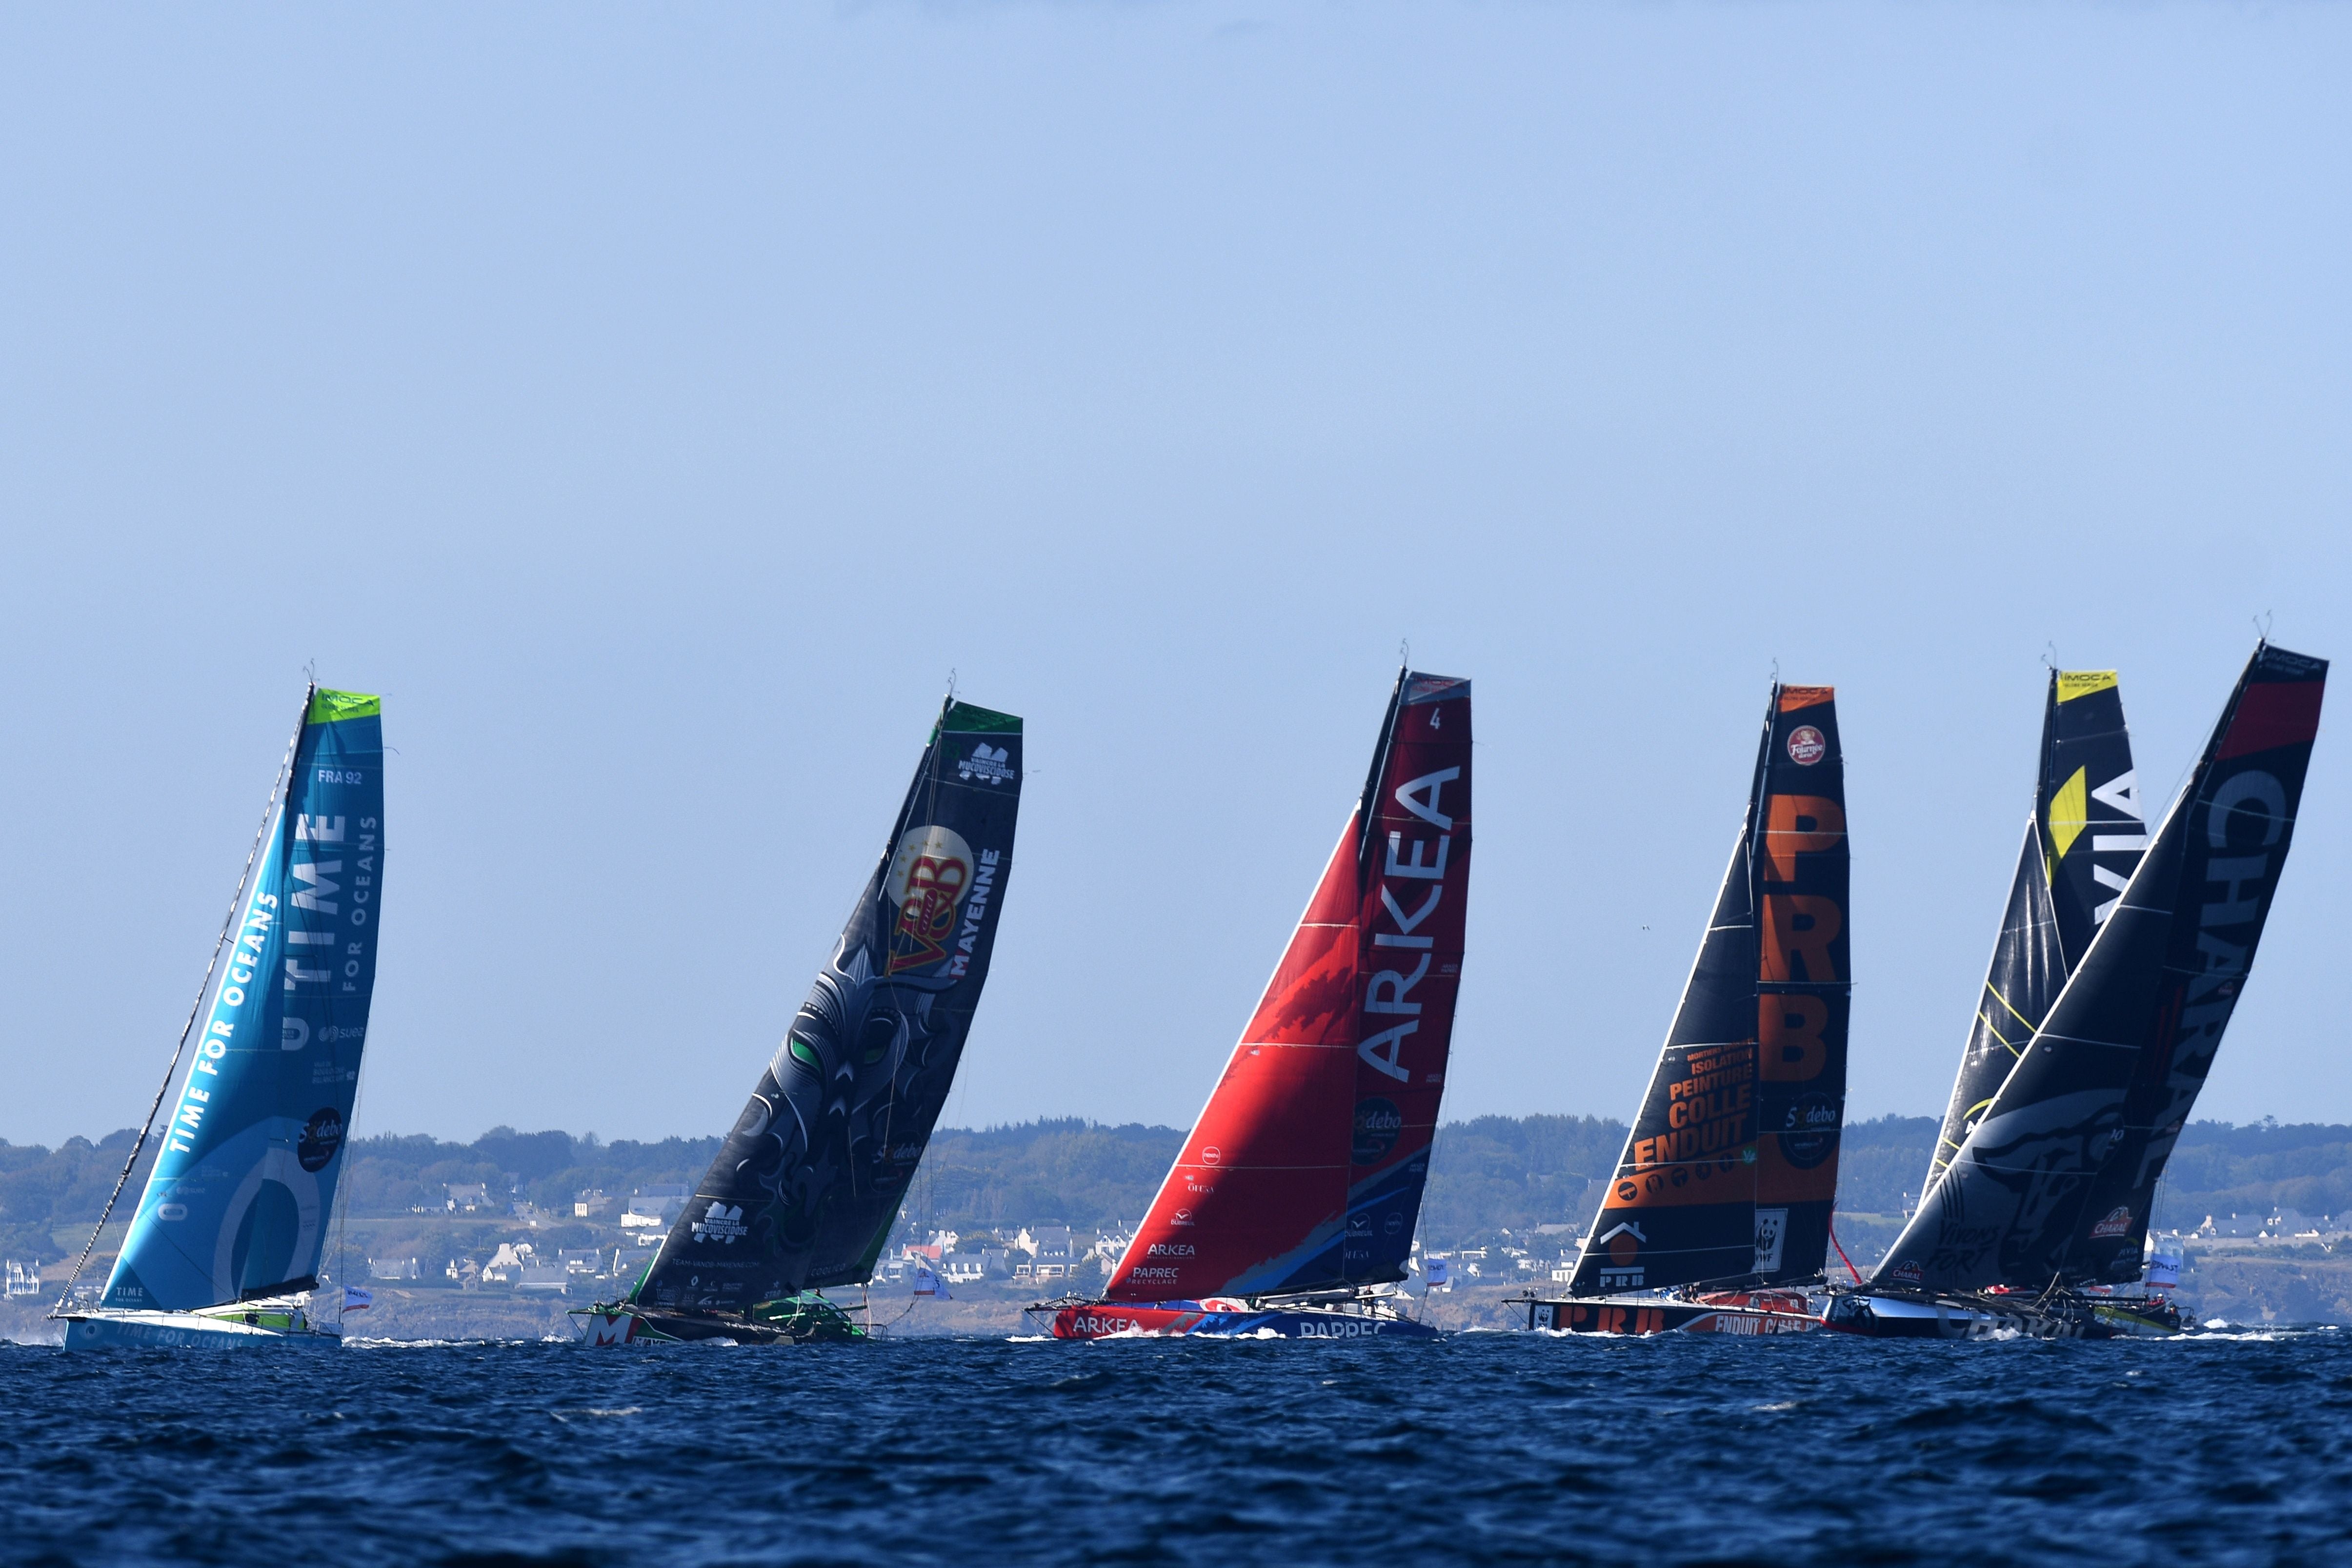 The Ocean Race is setting gender equality targets